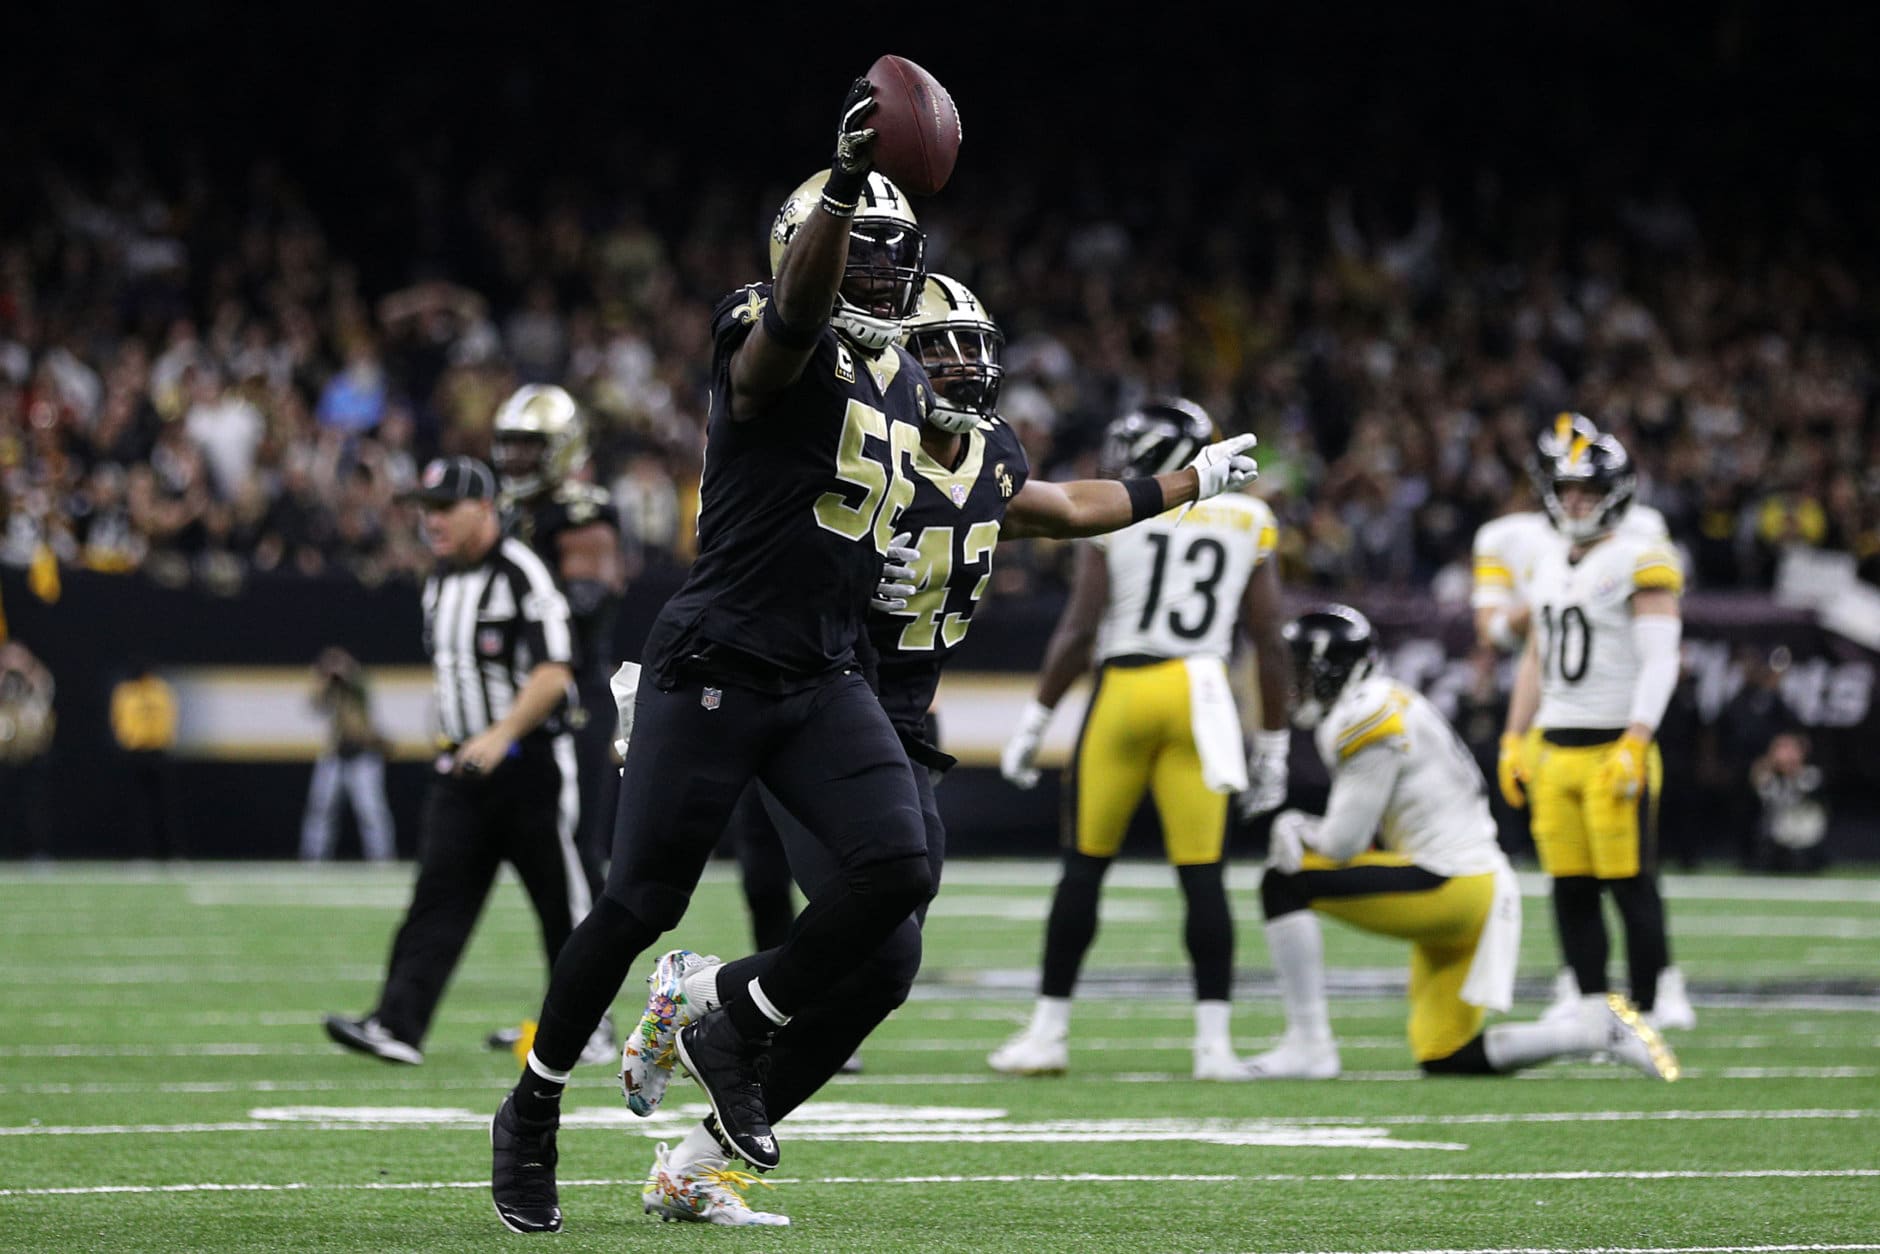 NEW ORLEANS, LOUISIANA - DECEMBER 23: Demario Davis #56 of the New Orleans Saints reacts after a recovered fumble against the Pittsburgh Steelers during the second half at the Mercedes-Benz Superdome on December 23, 2018 in New Orleans, Louisiana. (Photo by Chris Graythen/Getty Images)